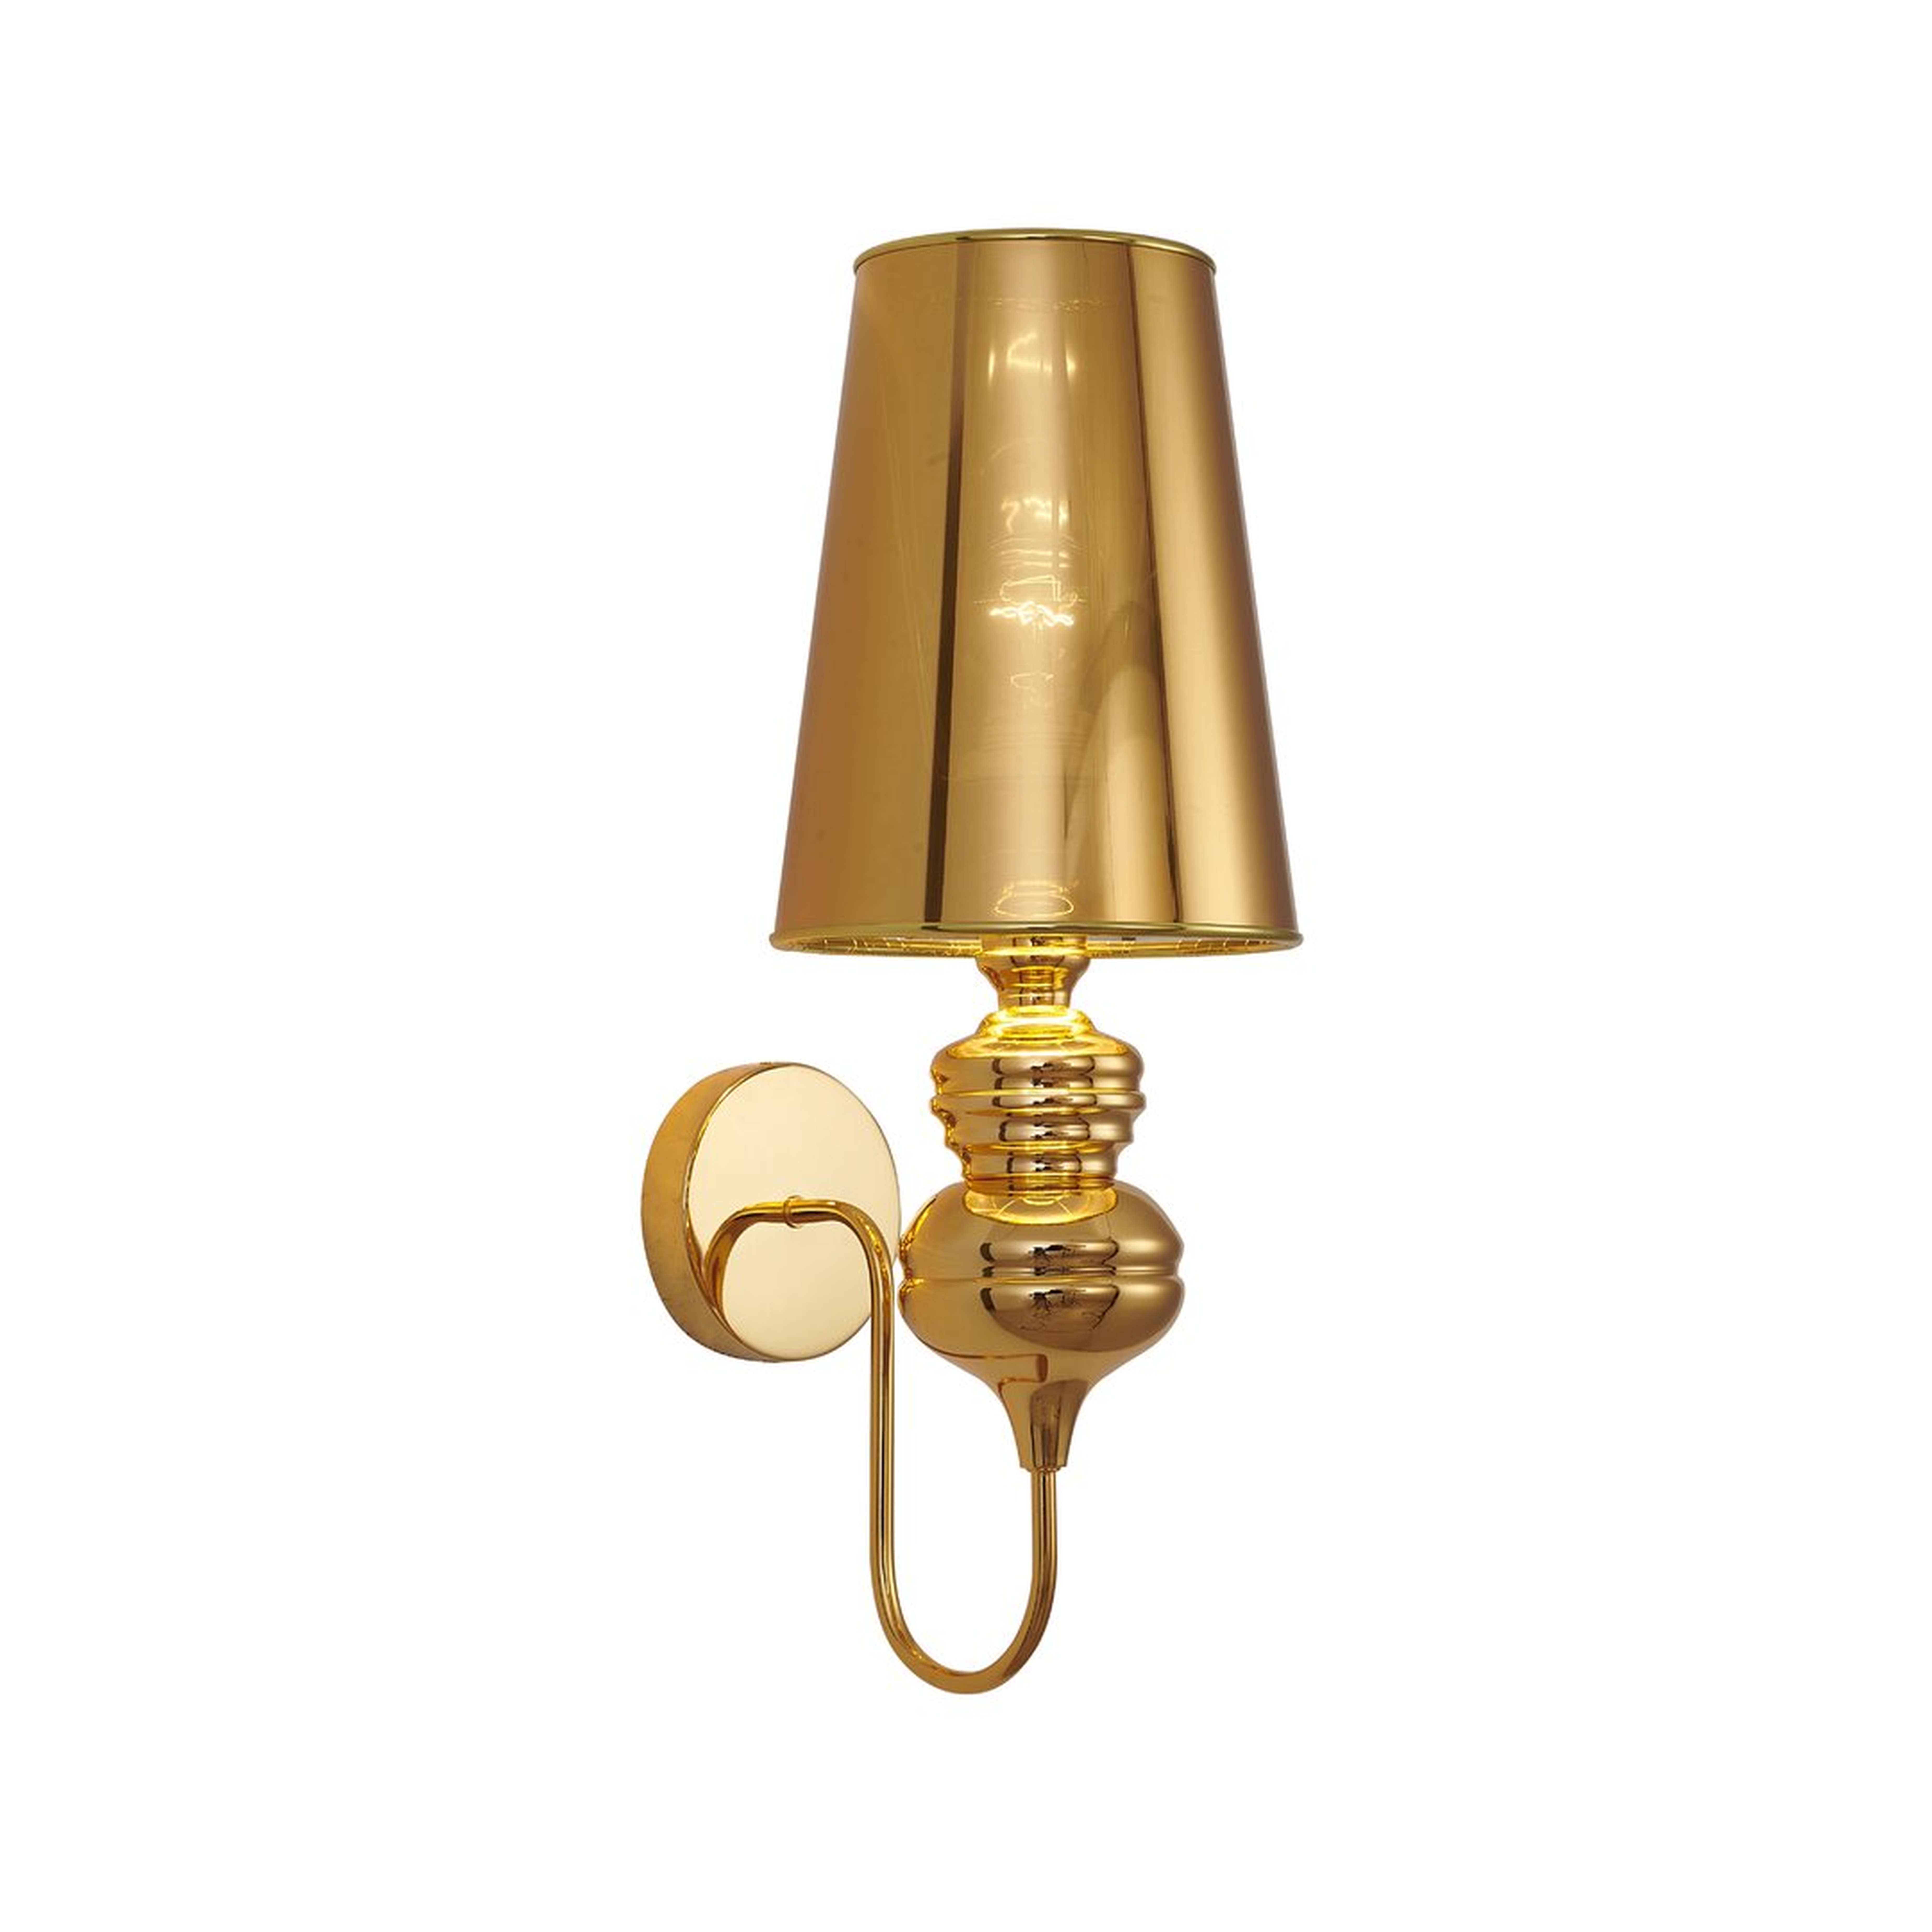 "Bethel International This Wall Sconce Is In A Polished Gold Finish. The Frame Is Made Out Of A Steel, And It Comes With A Polished Gold Steel Shade. It Can Be Used In And Rooms, Entryways, And More." - Perigold